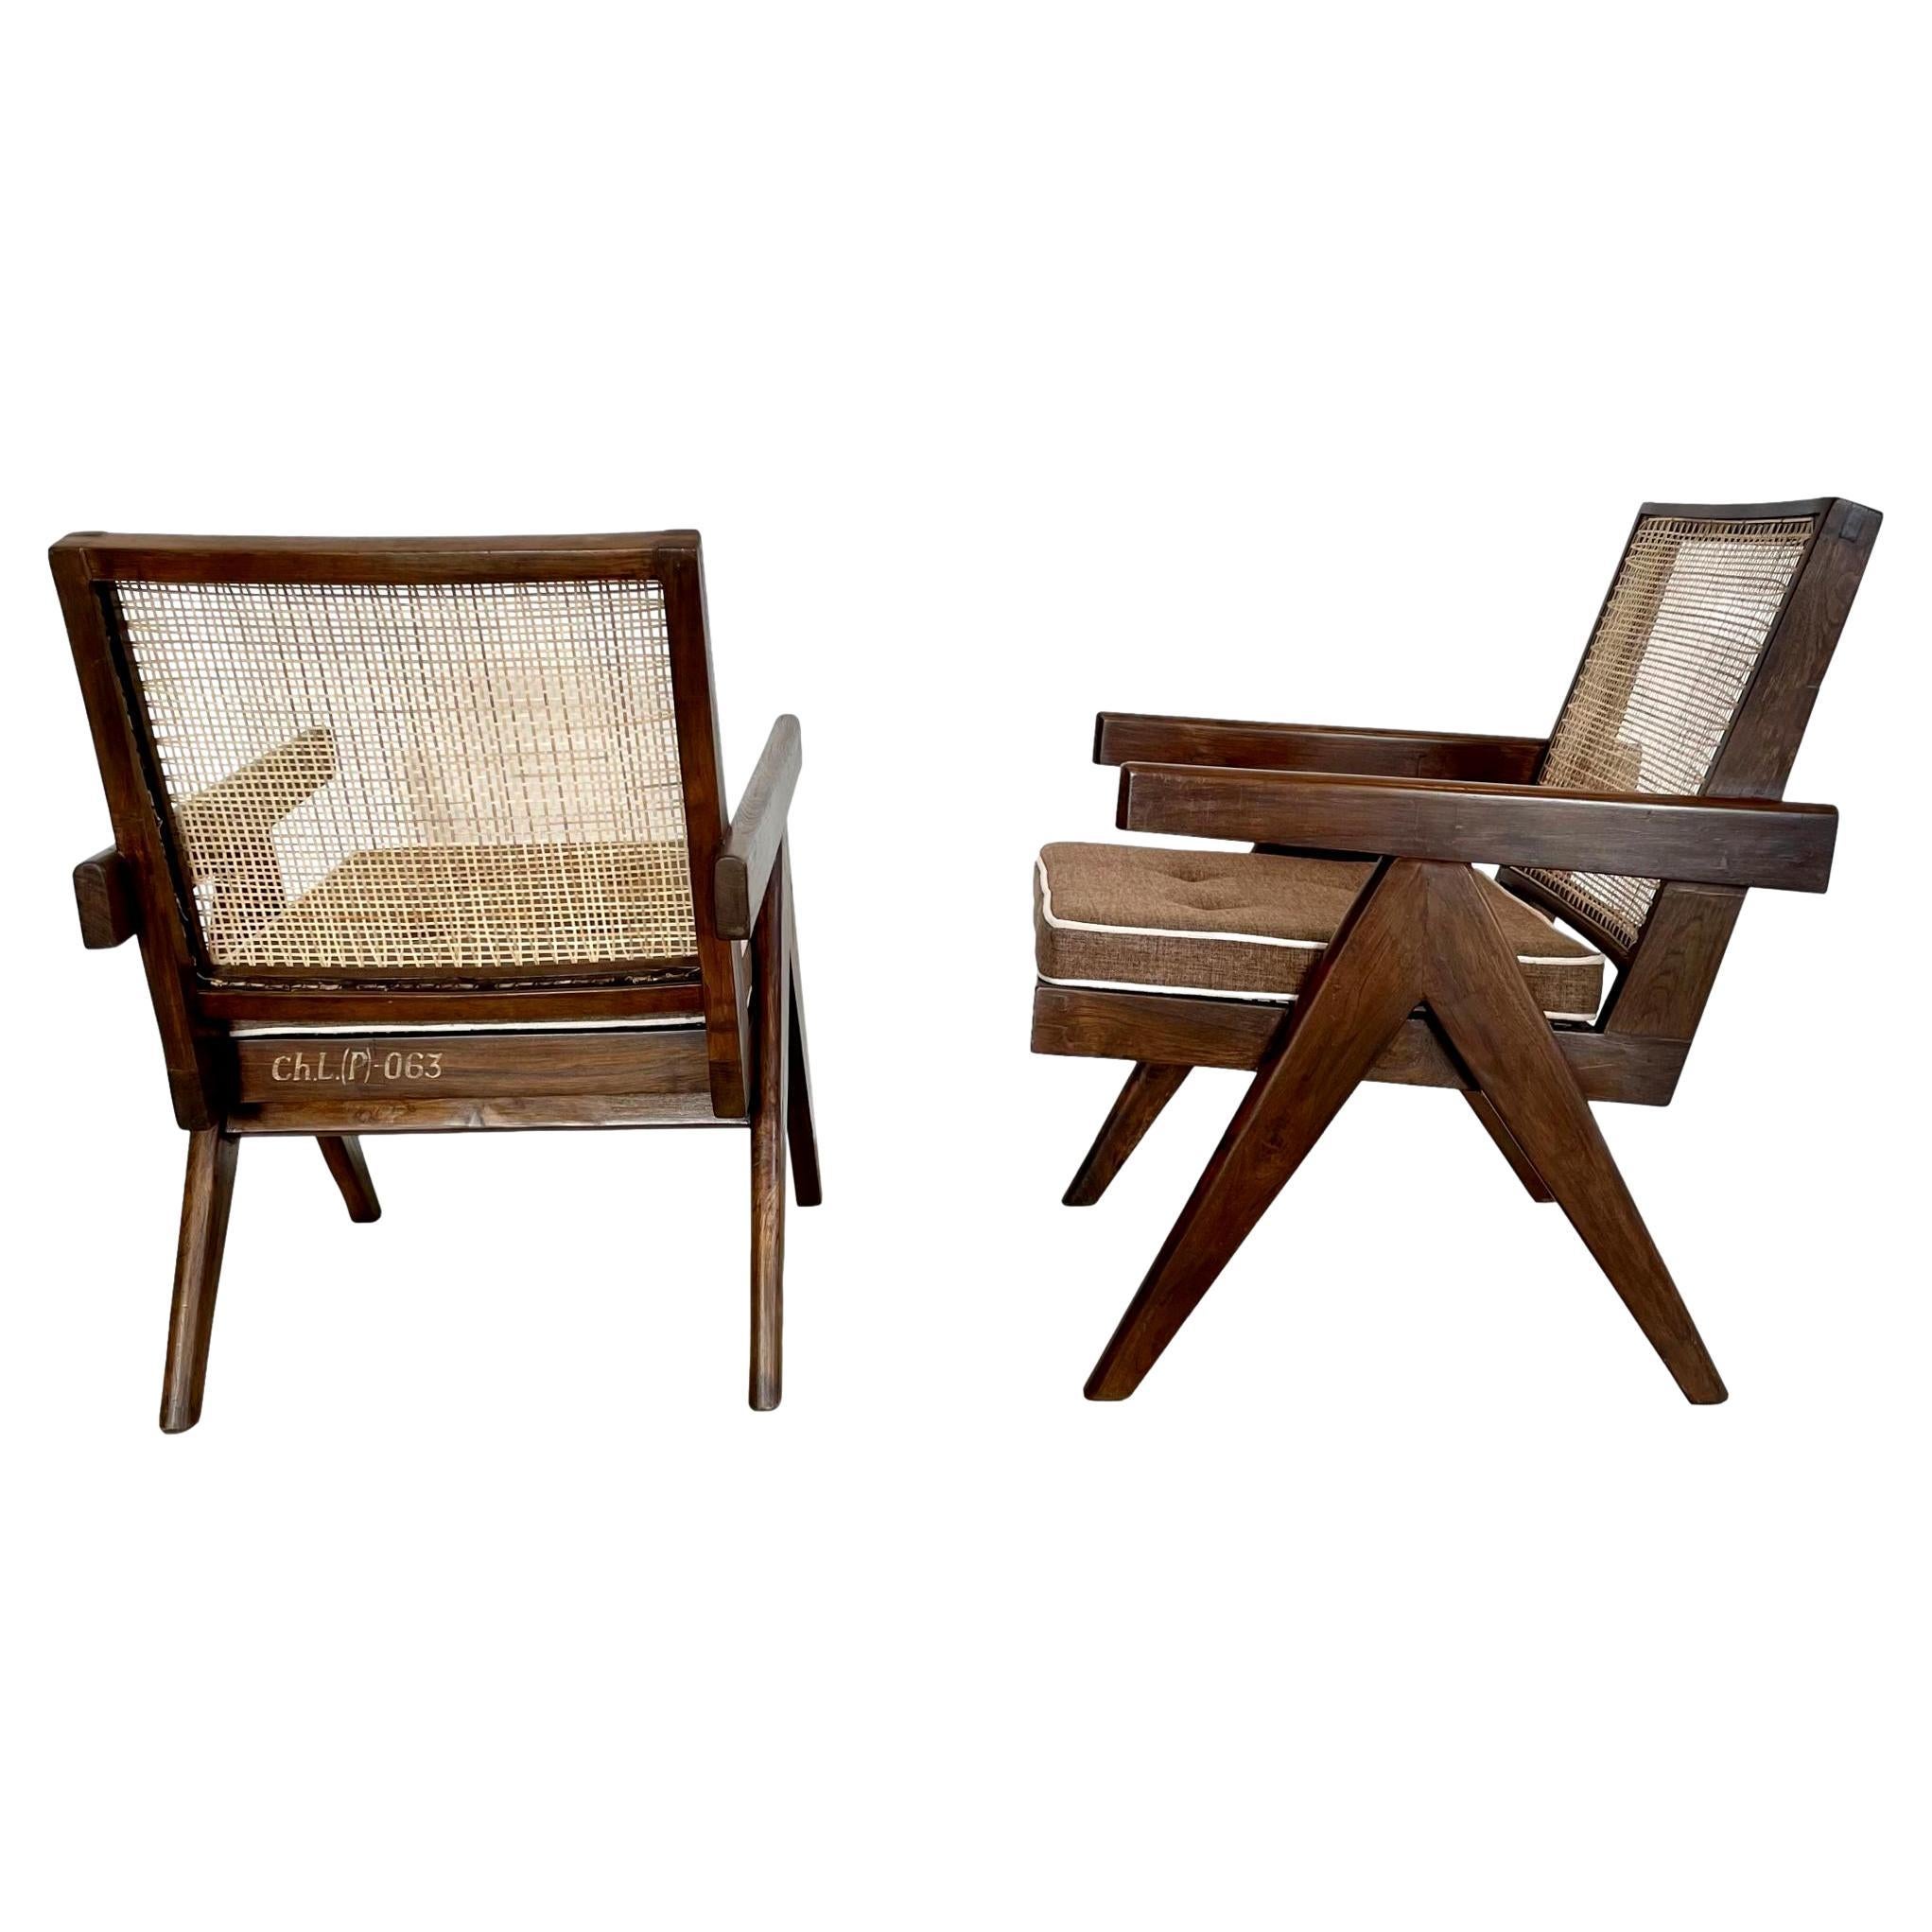 Pierre Jeanneret Easy Chairs, 1950s Chandigargh